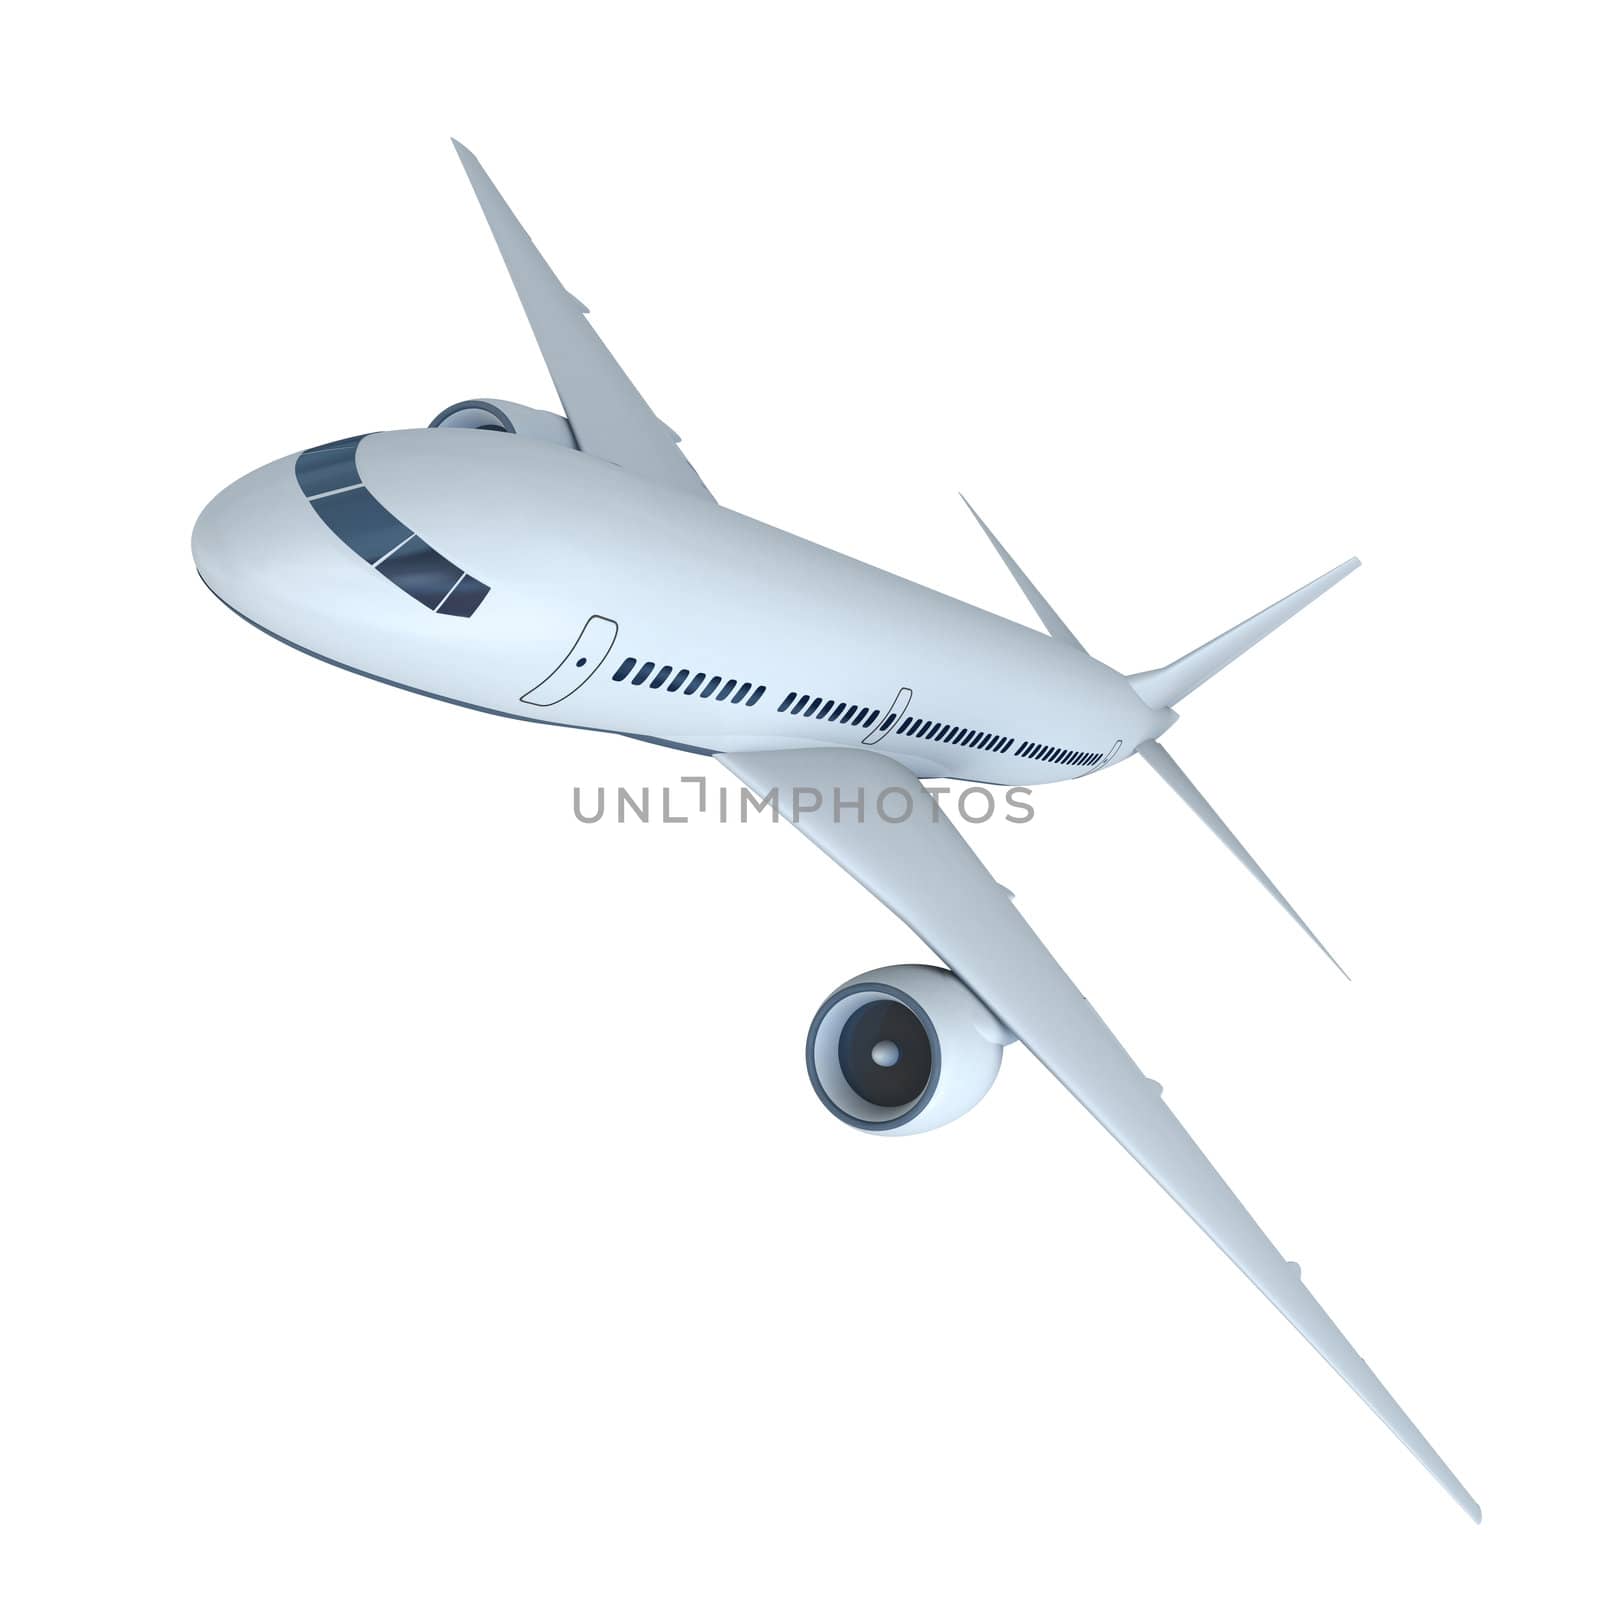 3D model of flying passenger aircraft isolated on white background